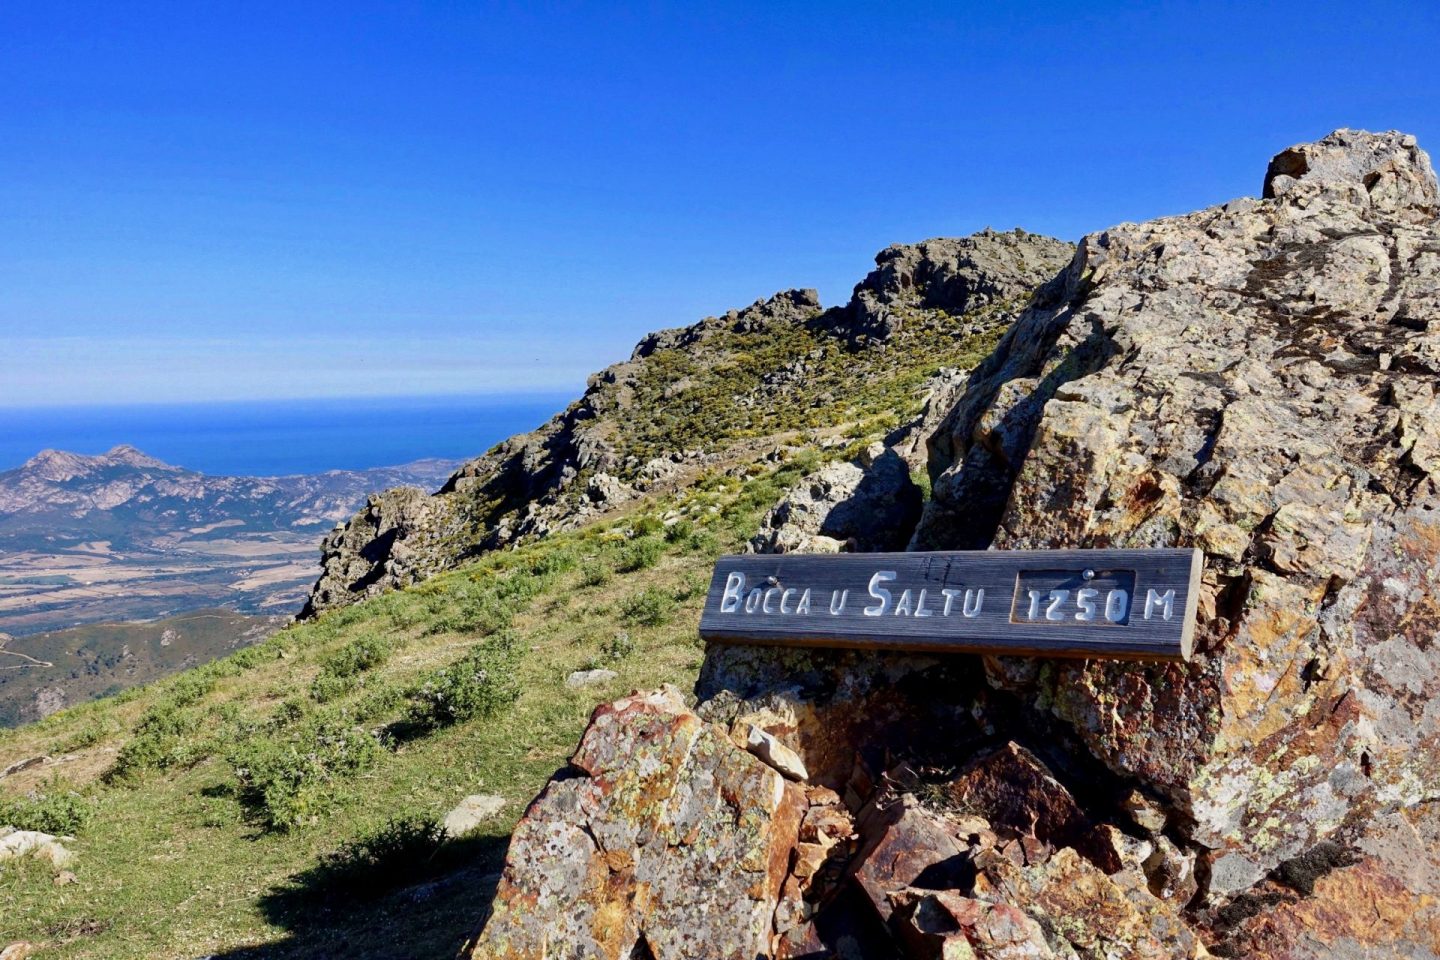 A wooden sign saying Bocca u Saltu 1250 m, bolted to rock. The sea can be seen in the distance behind.